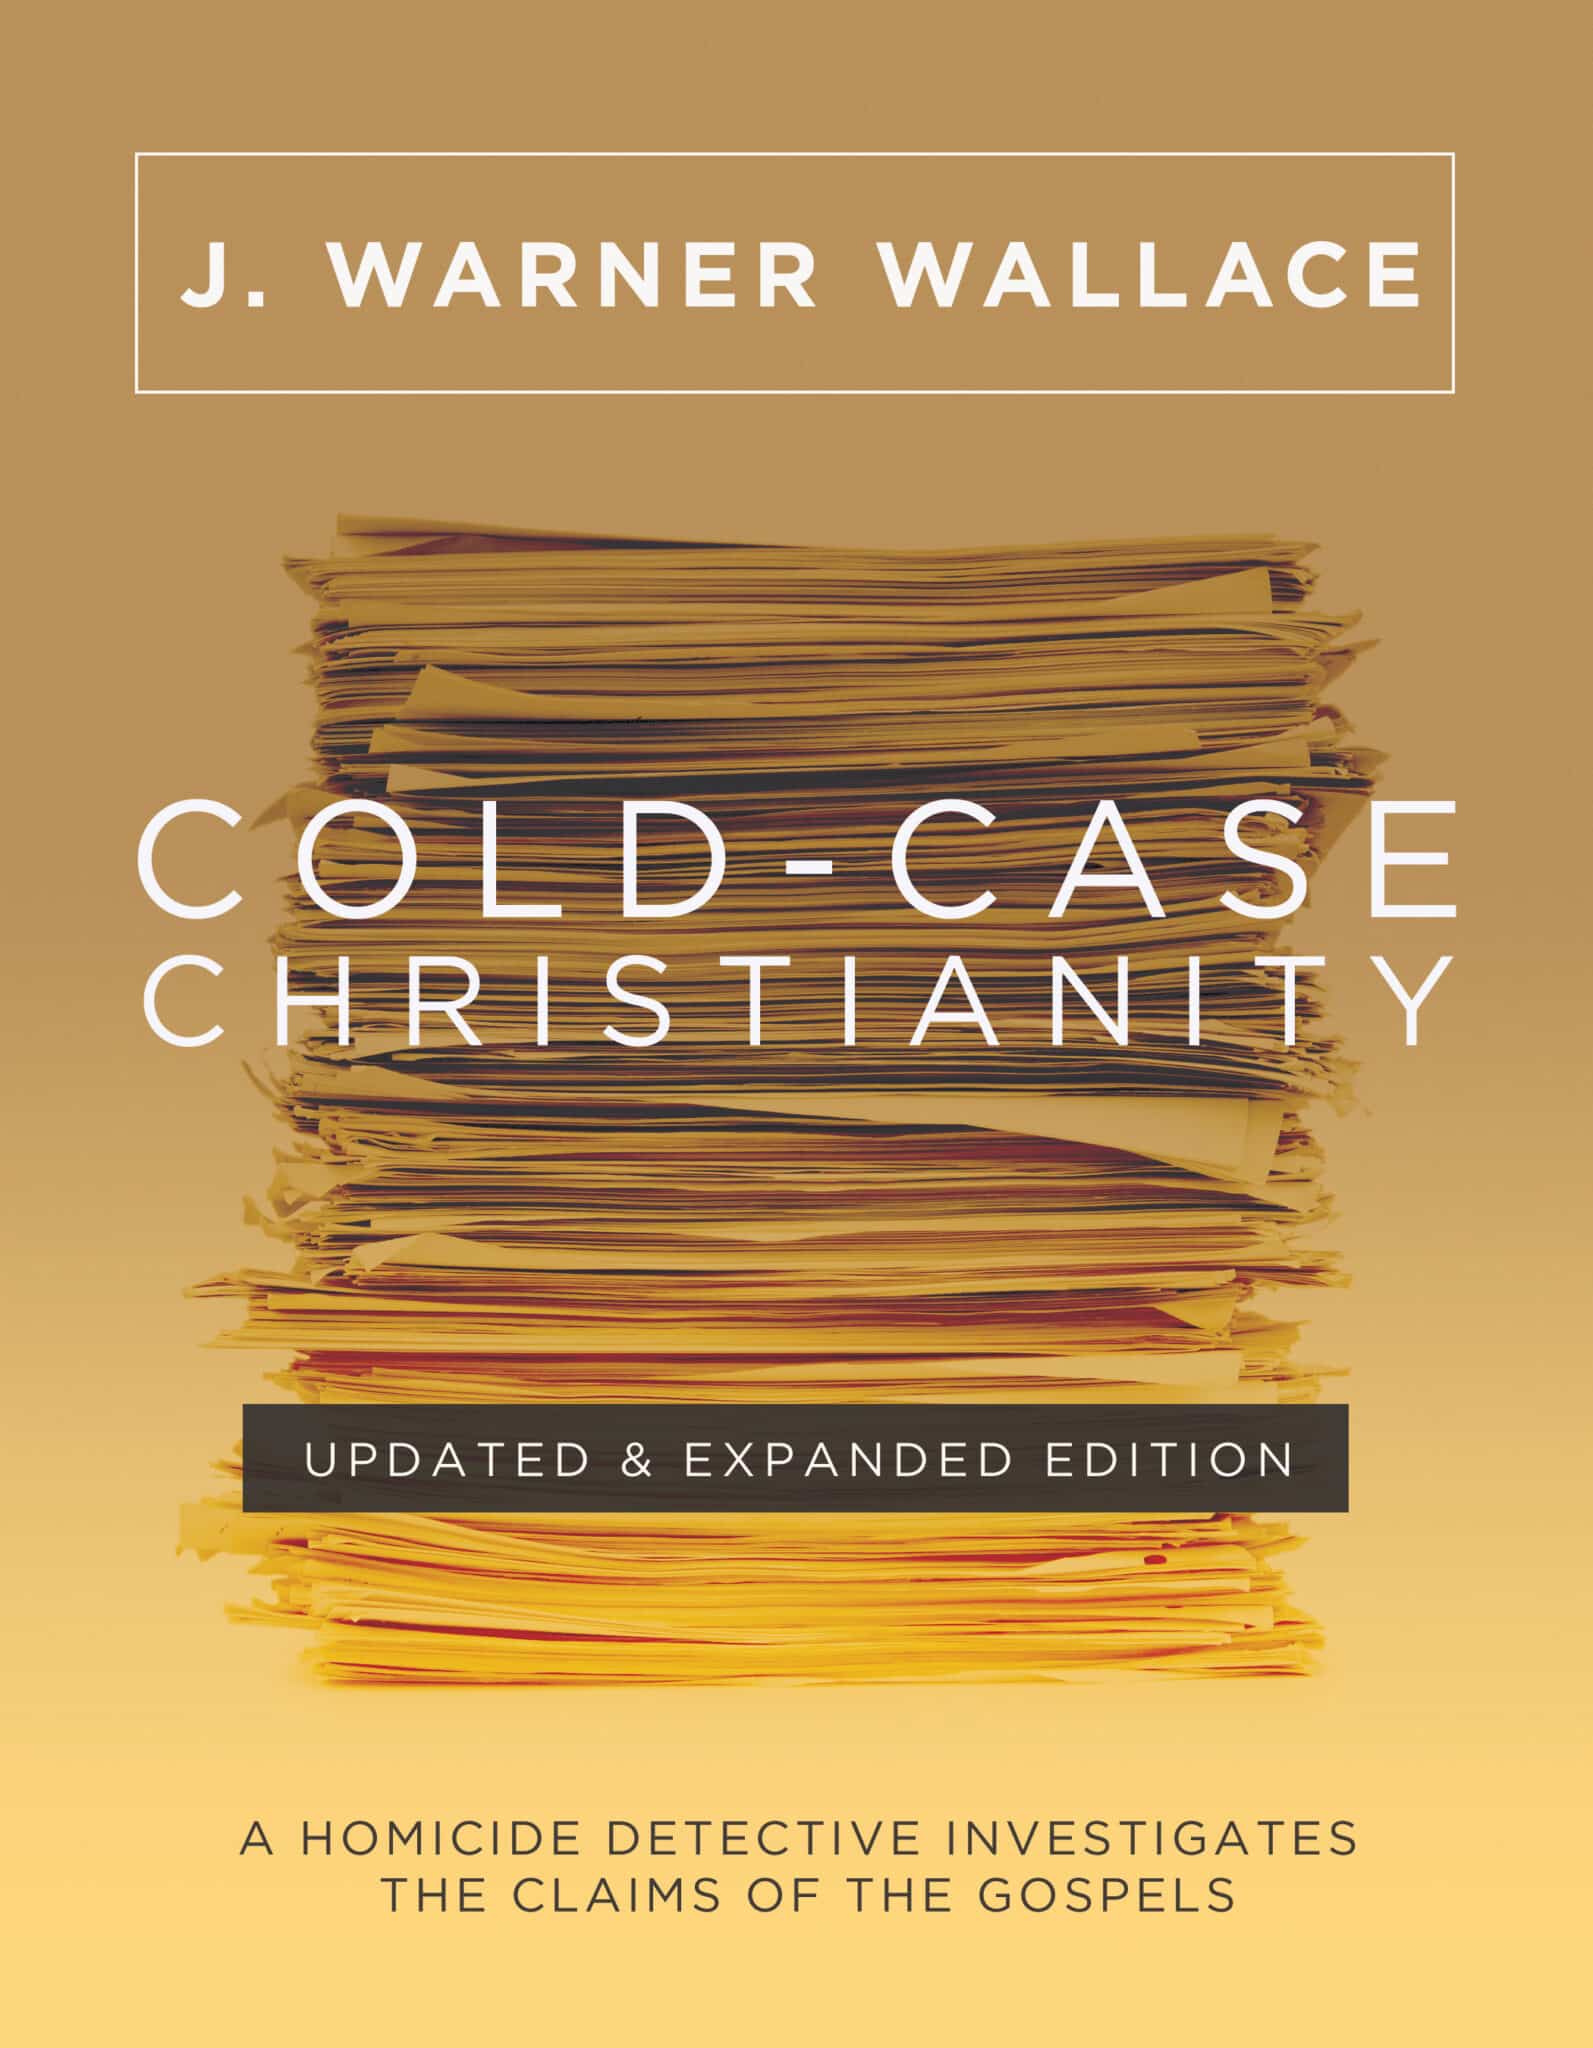 Cold case Christianity book cover image